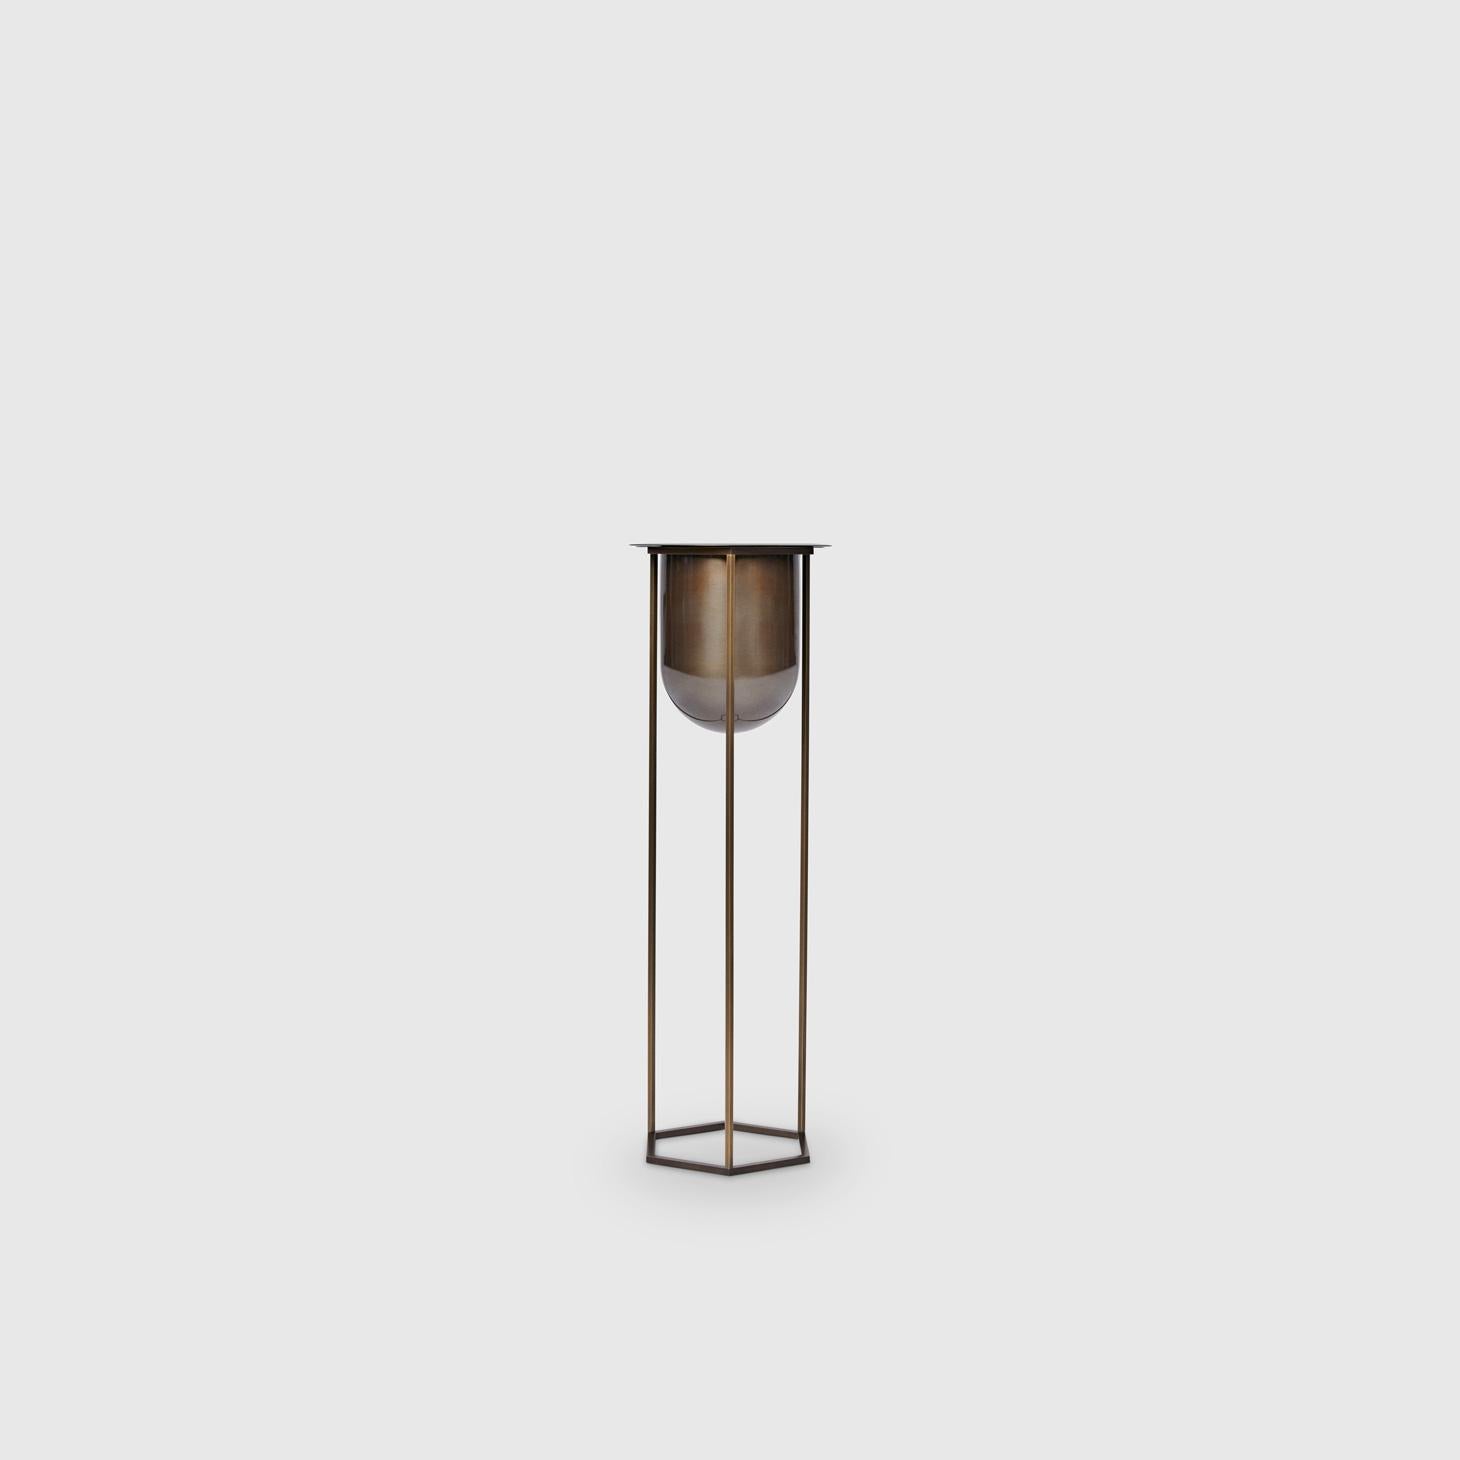 The Pacific Heights wine chiller by Yabu Pushelberg mixes the sophistication of entertaining in the past with a new minimal form. The exacting metal frame is crafted in Italy and comes in smoked bronze or smoked brass finishes as its Gin Lane bar